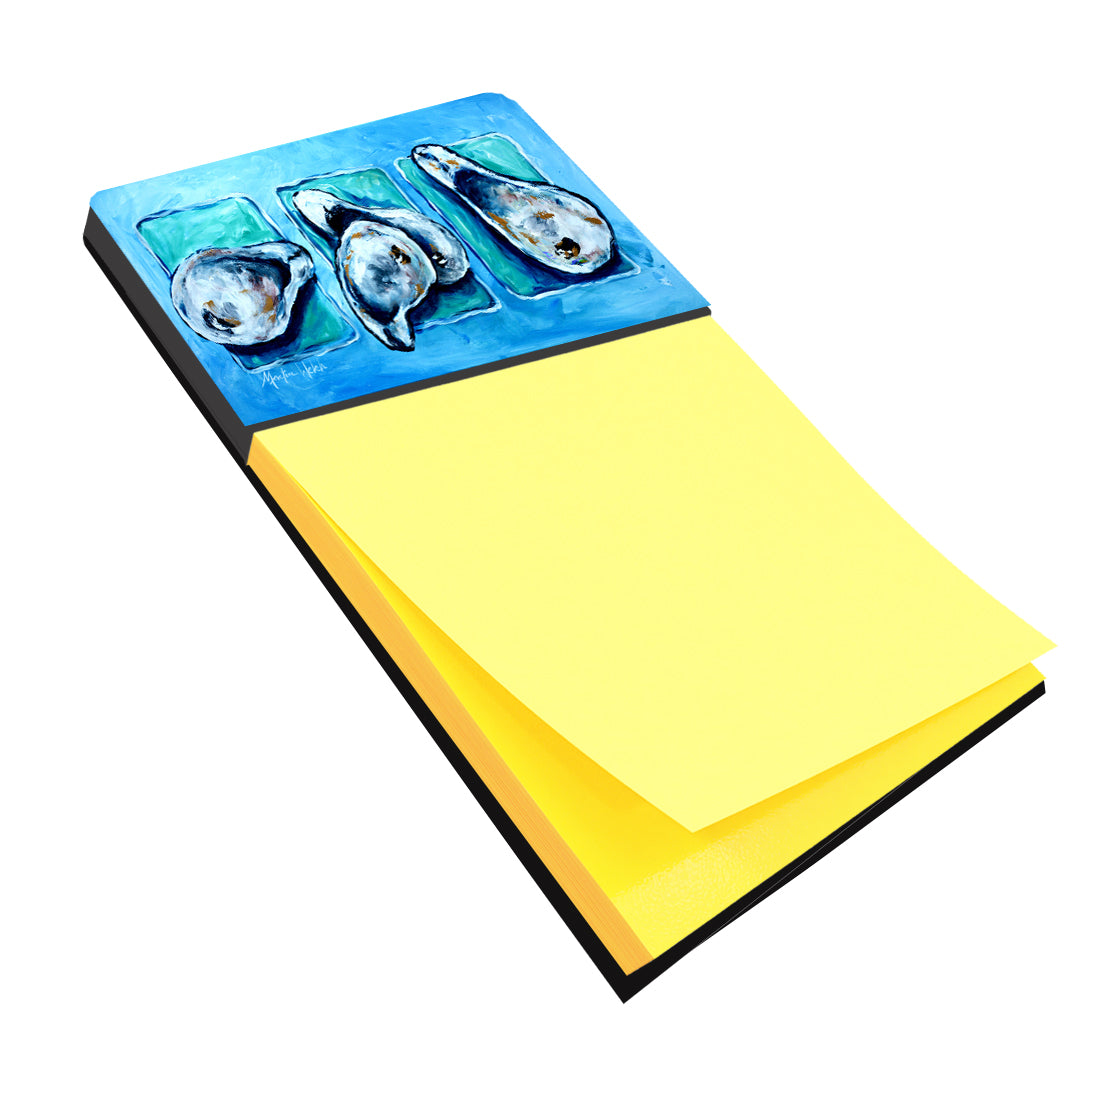 Buy this Oysters Oyster + Oyster = Oysters Sticky Note Holder